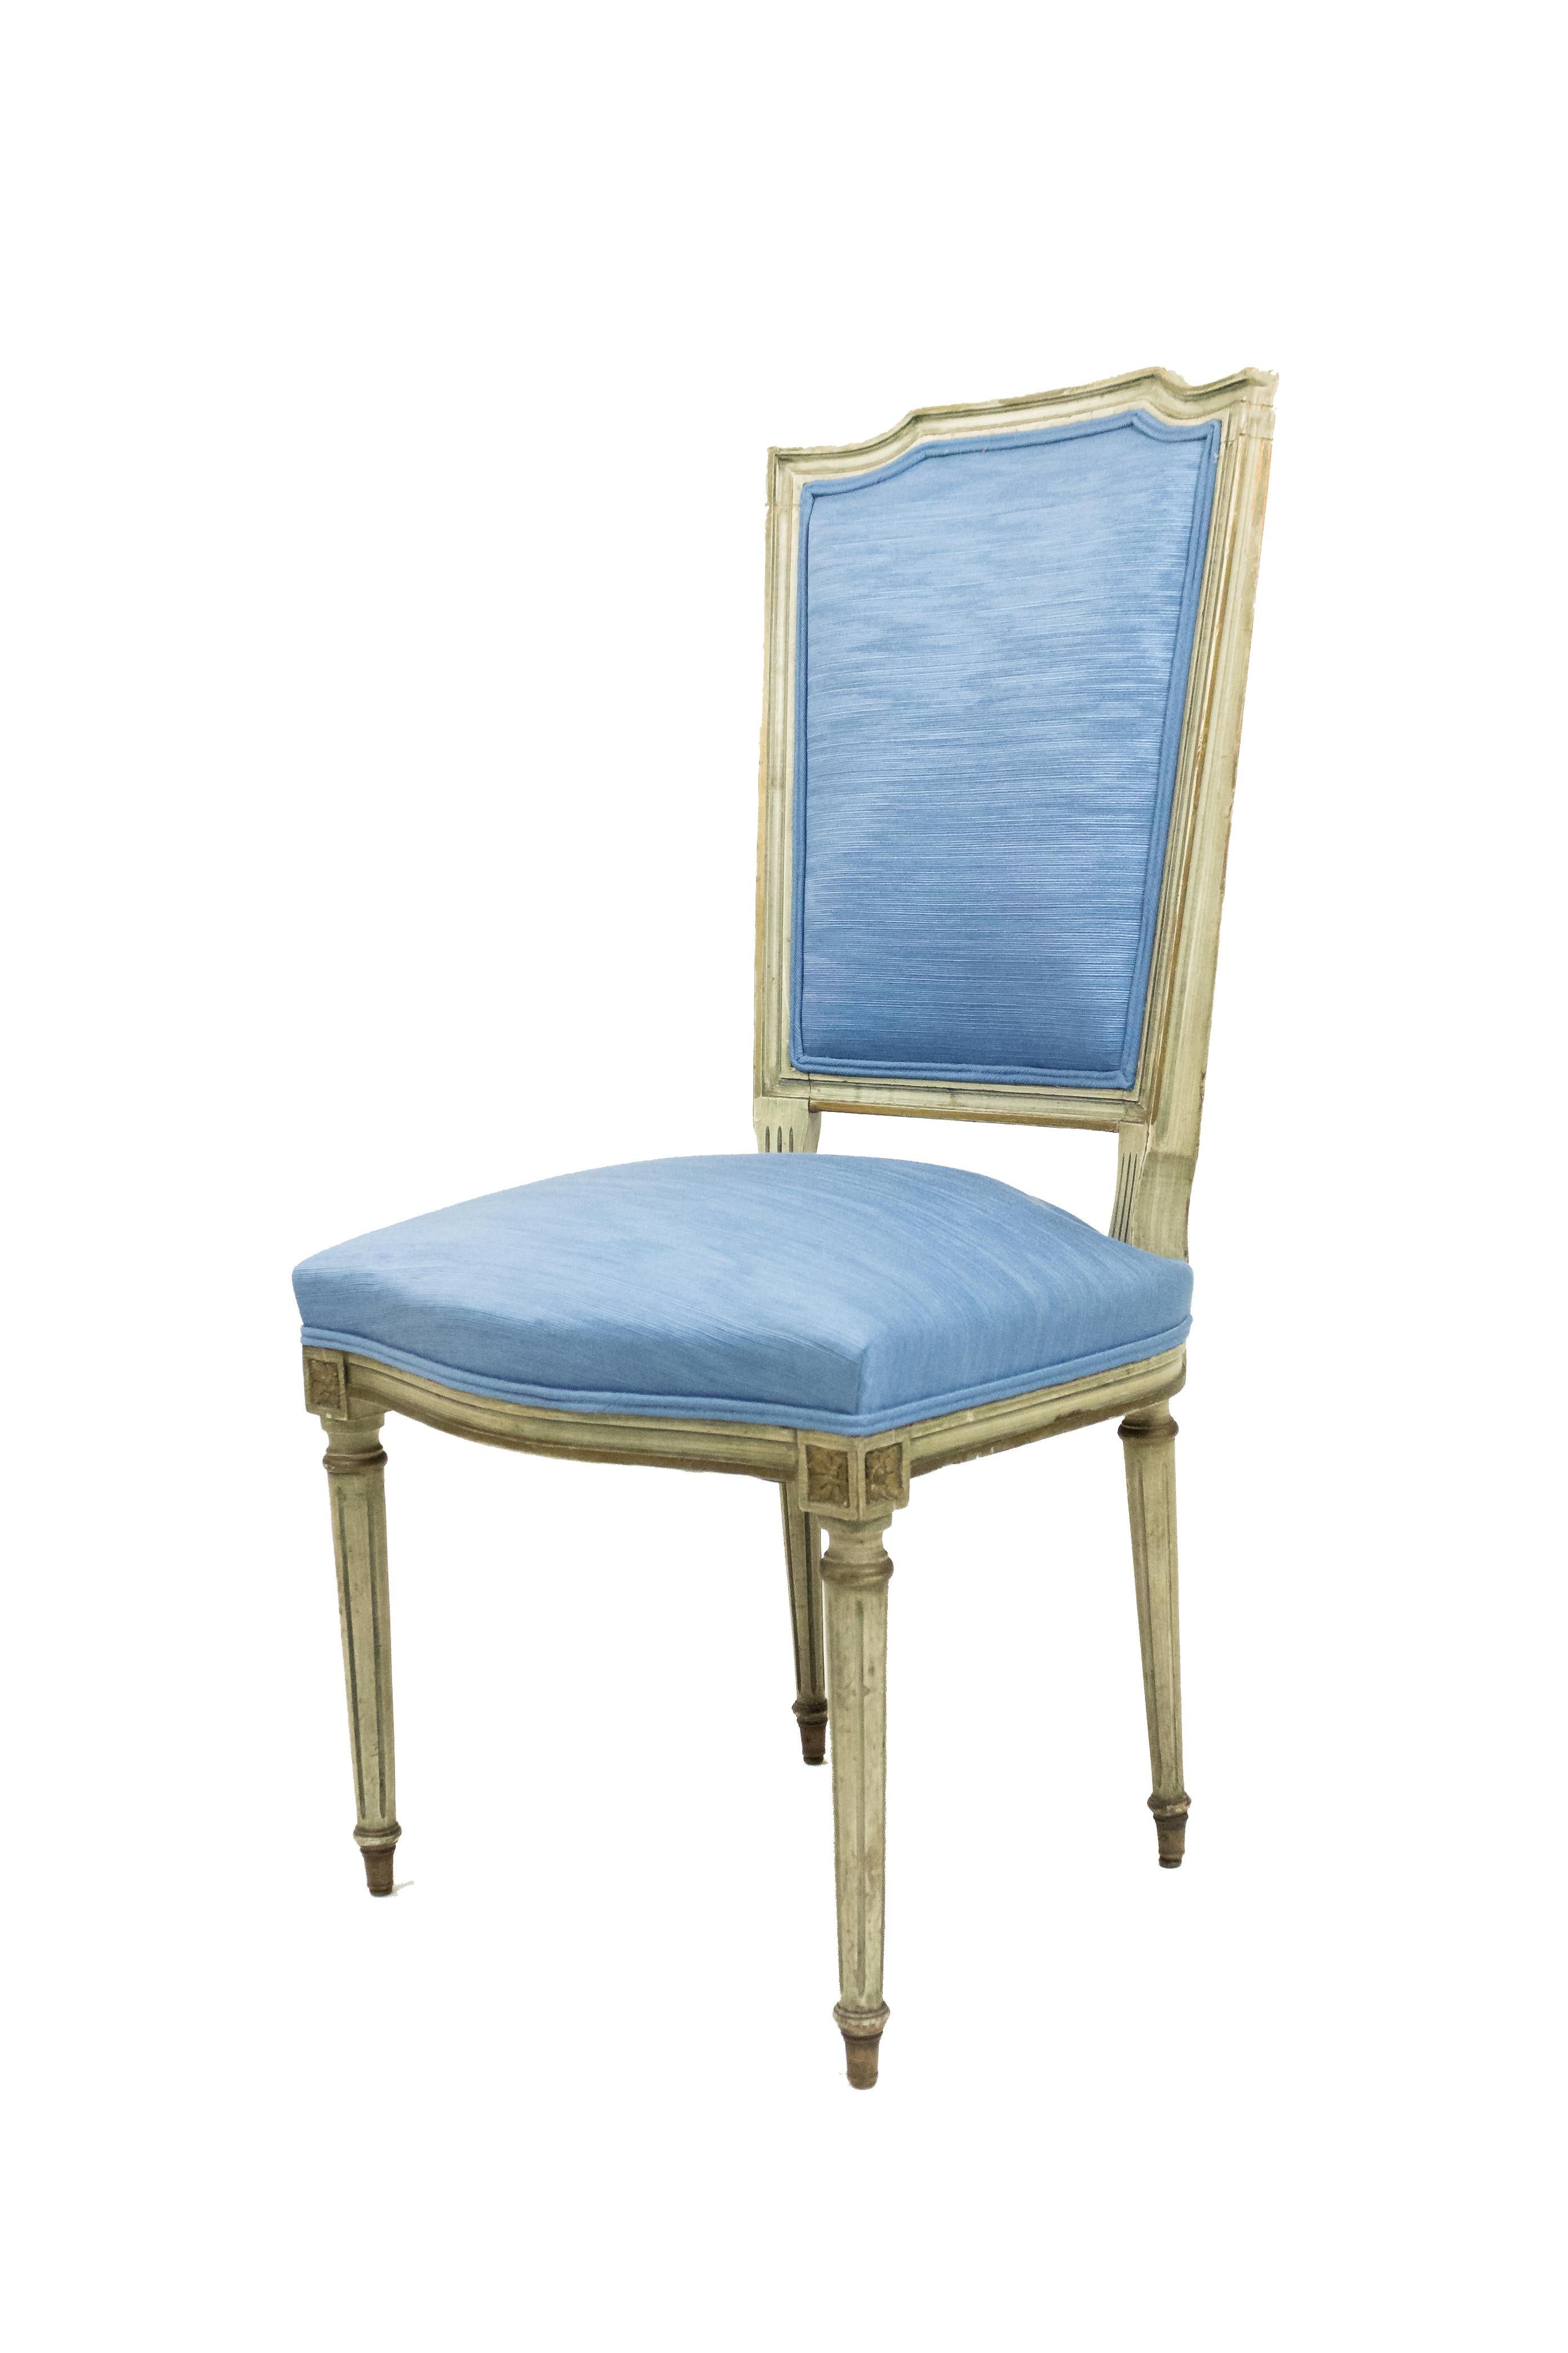 Set of 6 of French Louis XVI style (20th Cent) light green painted side chairs with light blue upholstered seat and back.
